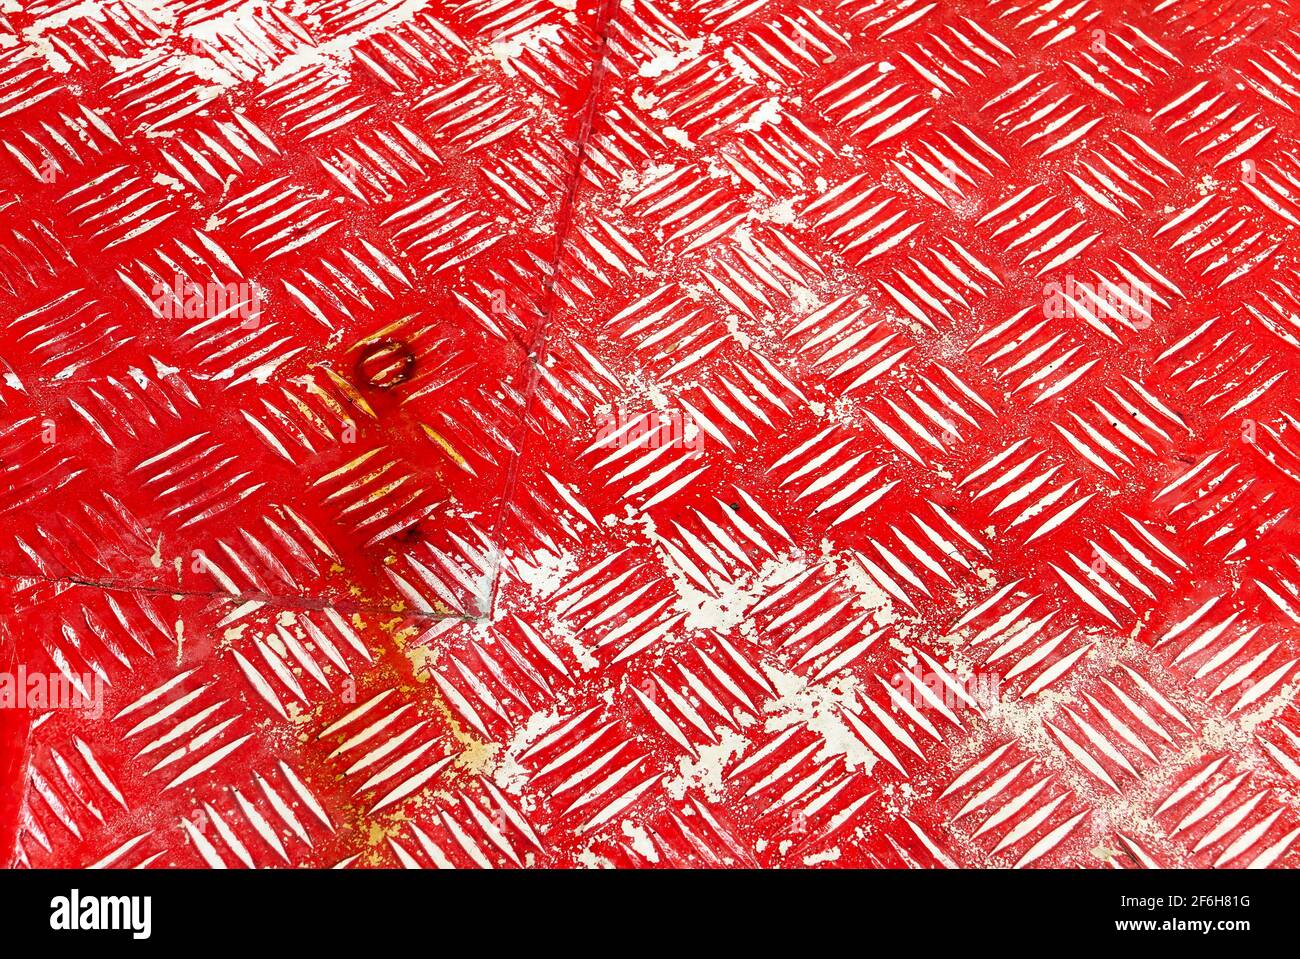 Close-up of an old red painted metal floor with patterns and rusty stains Stock Photo